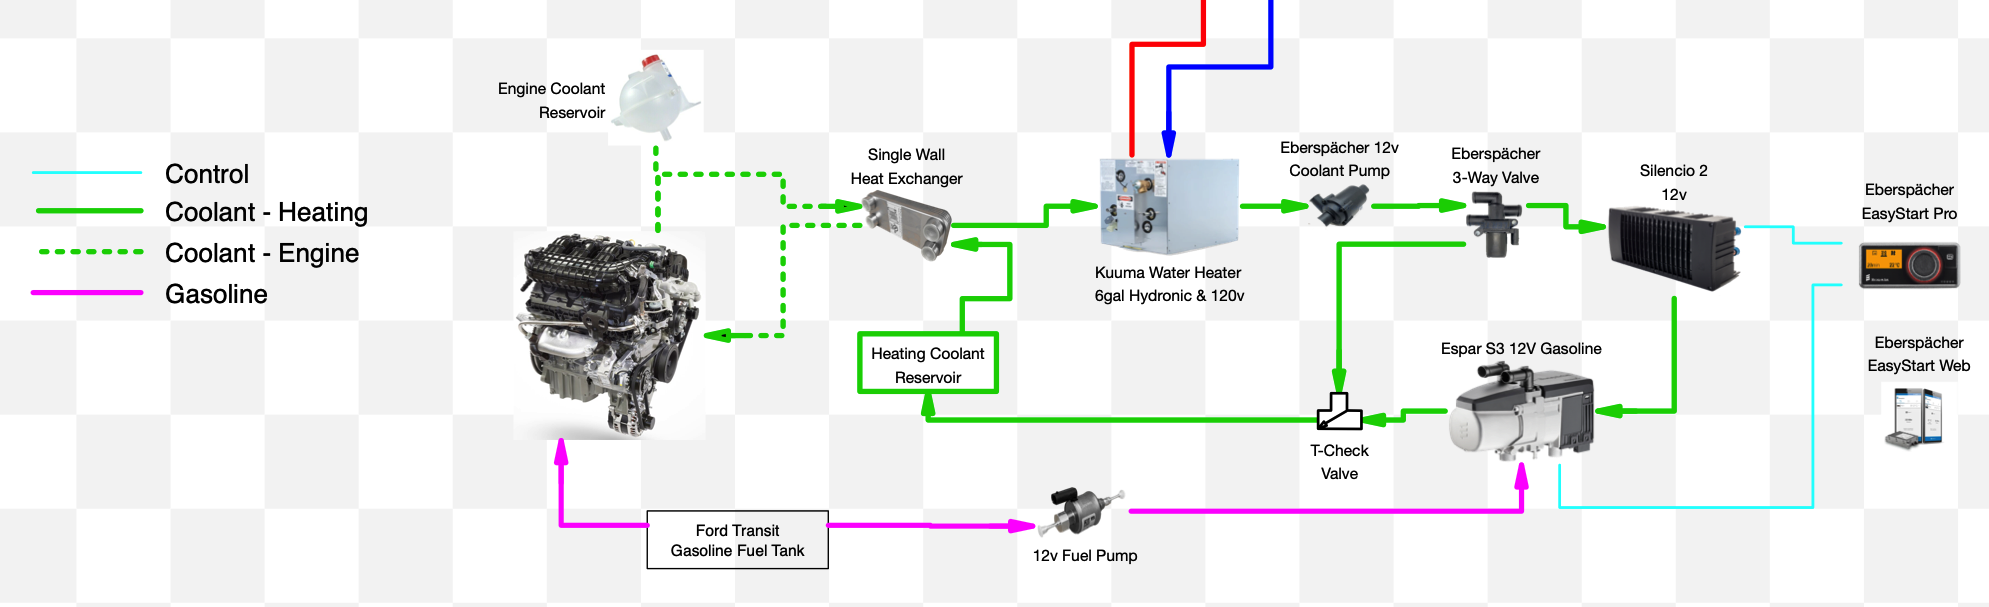 Hydronic System Diagram